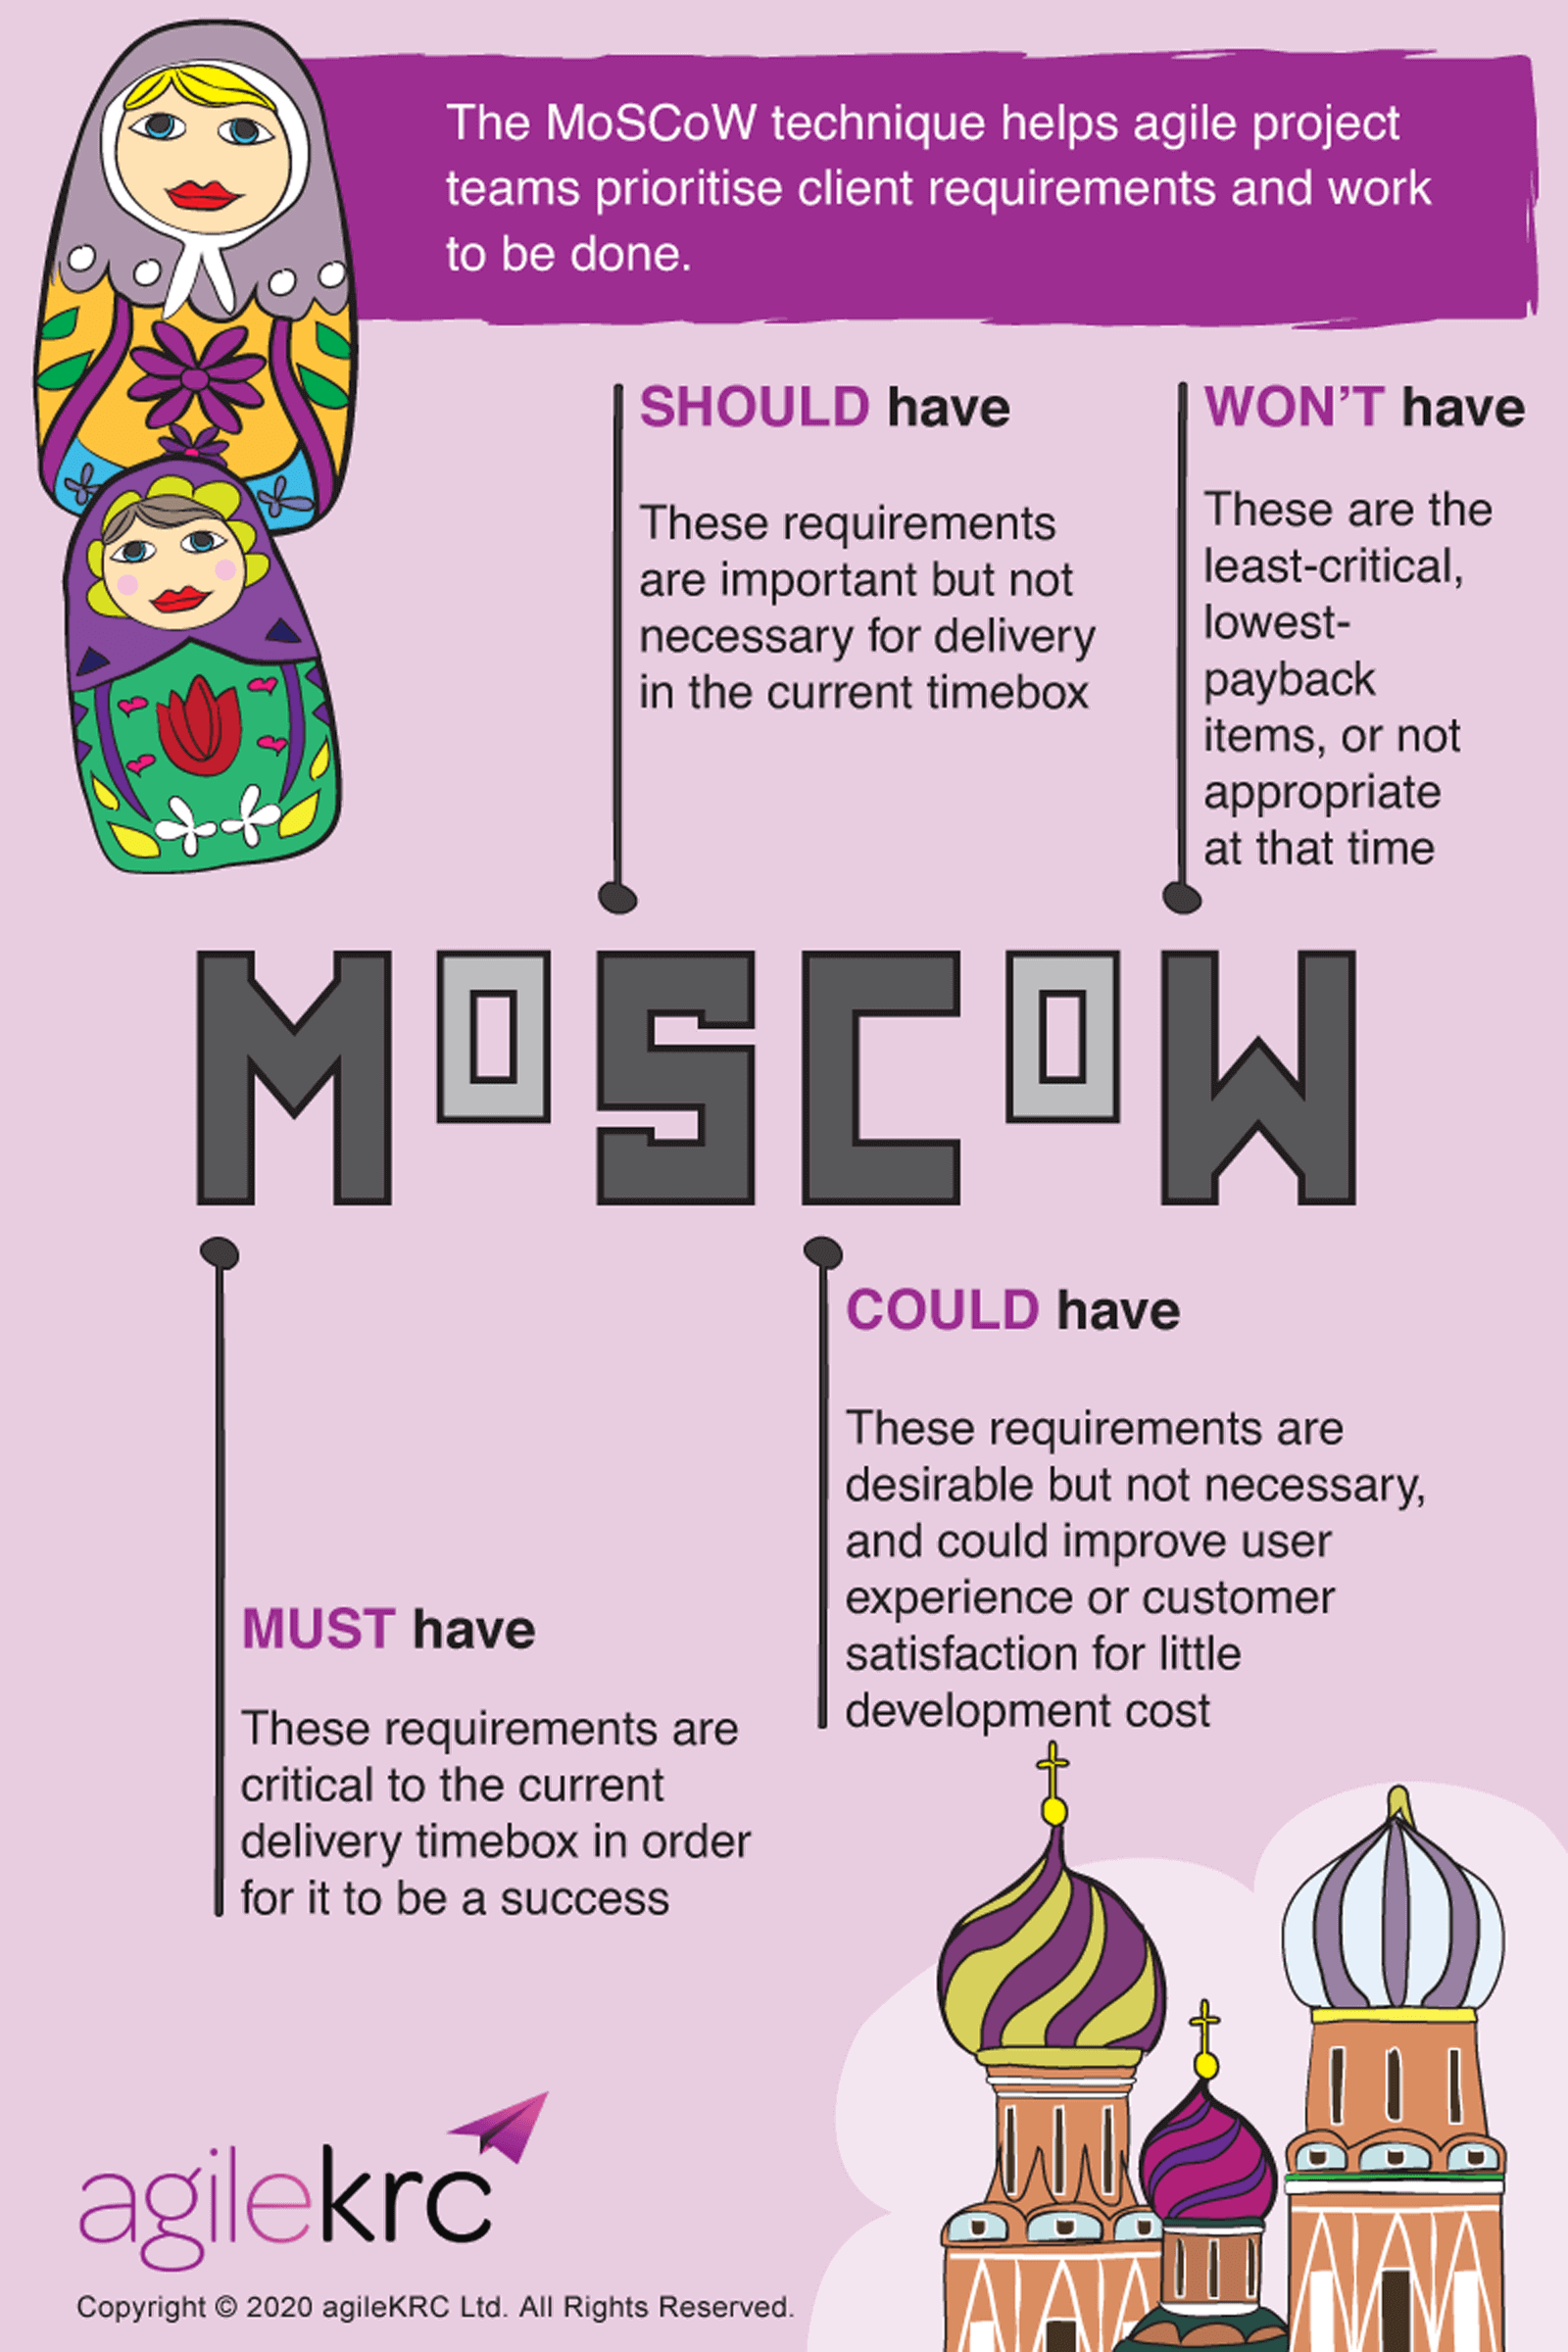 How to use MoSCoW infographic